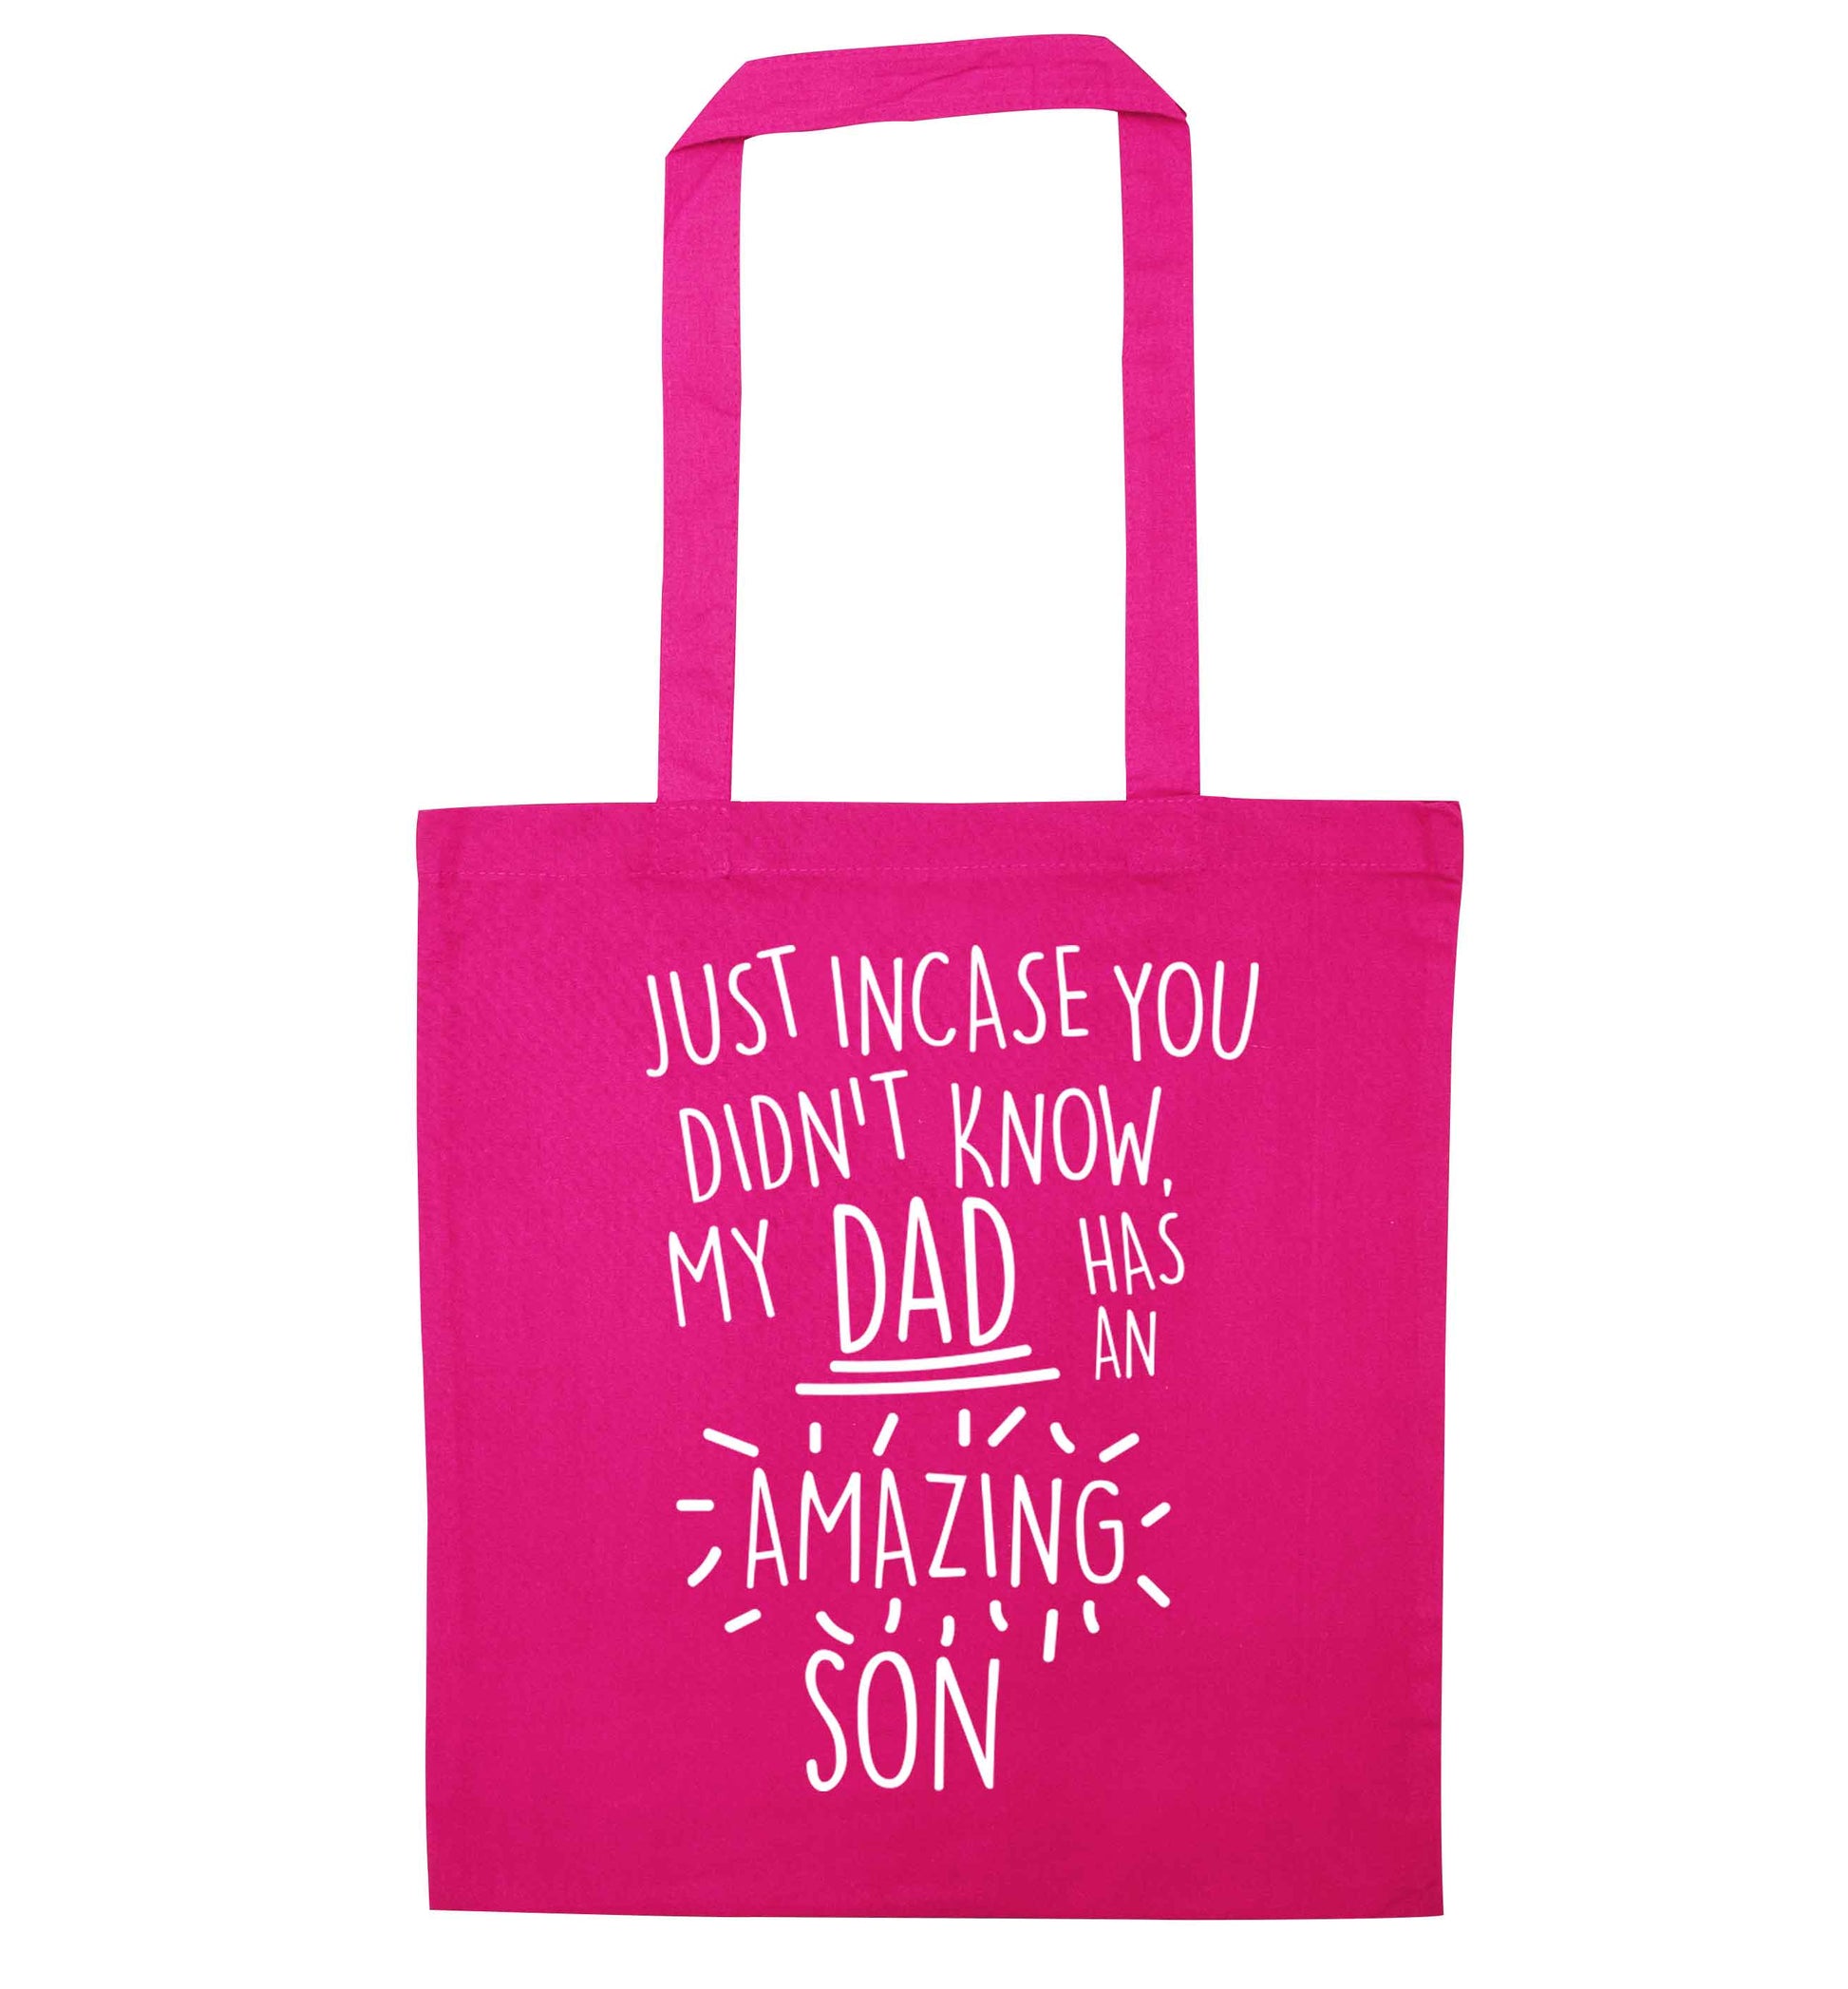 Just incase you didn't know my dad has an amazing son pink tote bag